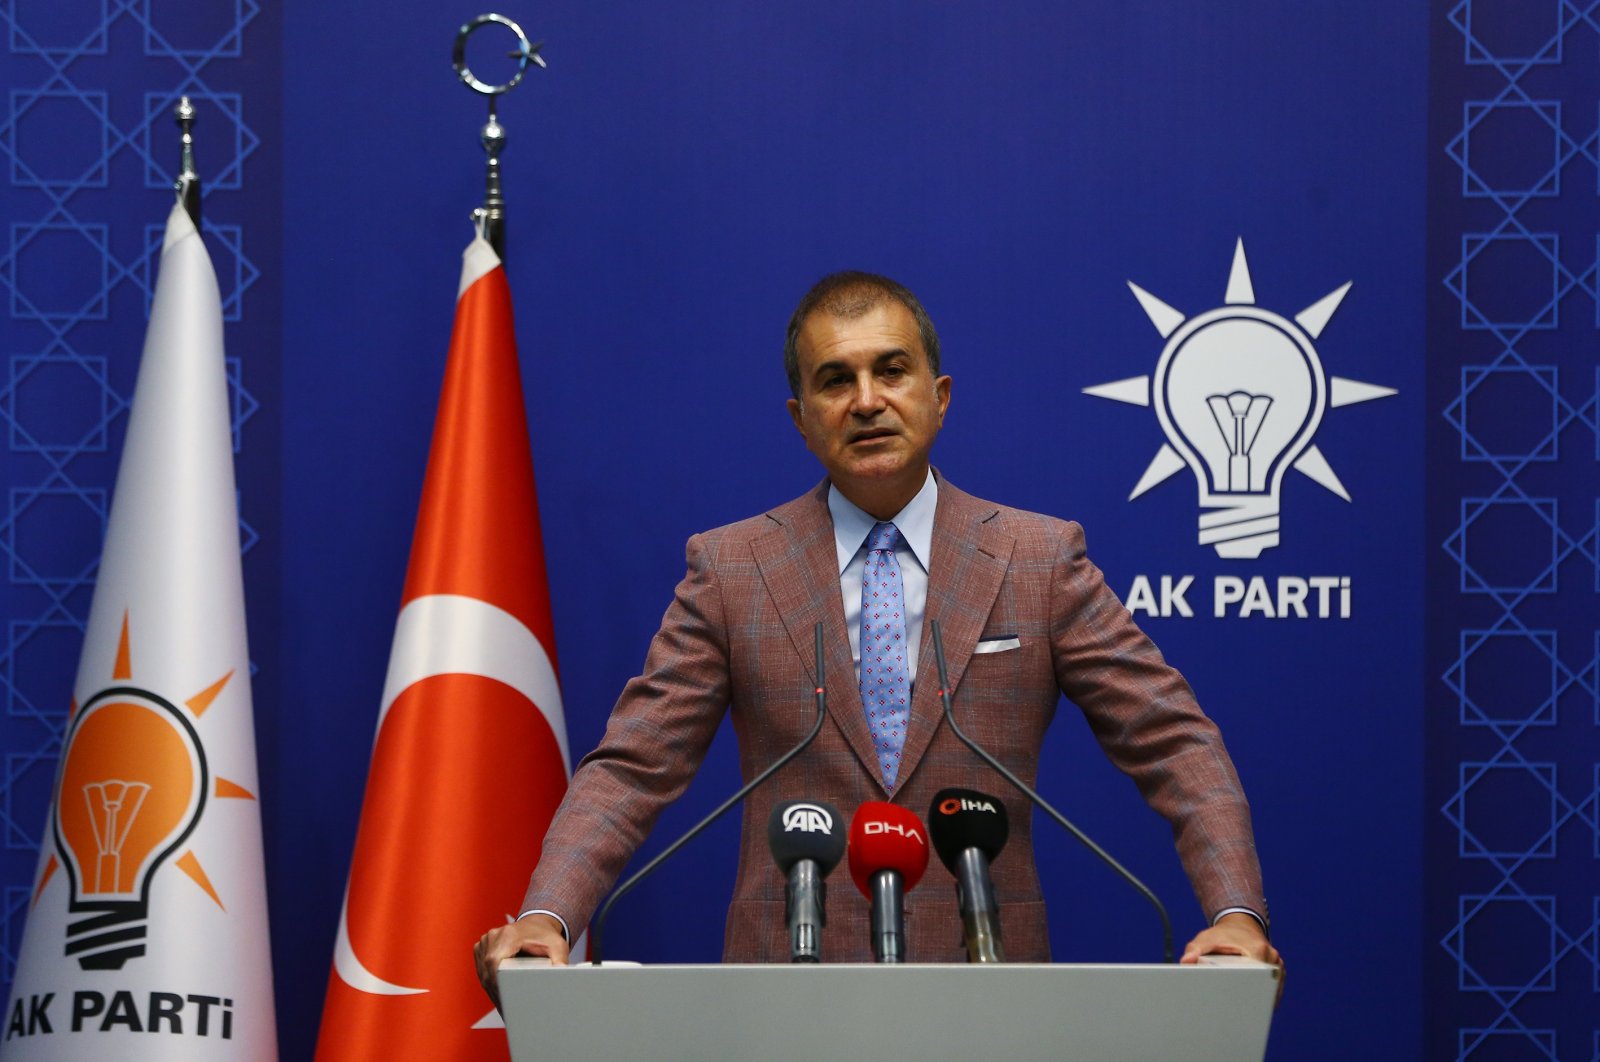 The ruling Justice and Development Party (AK Party) spokesperson Ömer Çelik speaks after a Central Decision and Executive Board meeting at party headquarters in the capital Ankara, Sept. 22, 2020. (AA Photo)